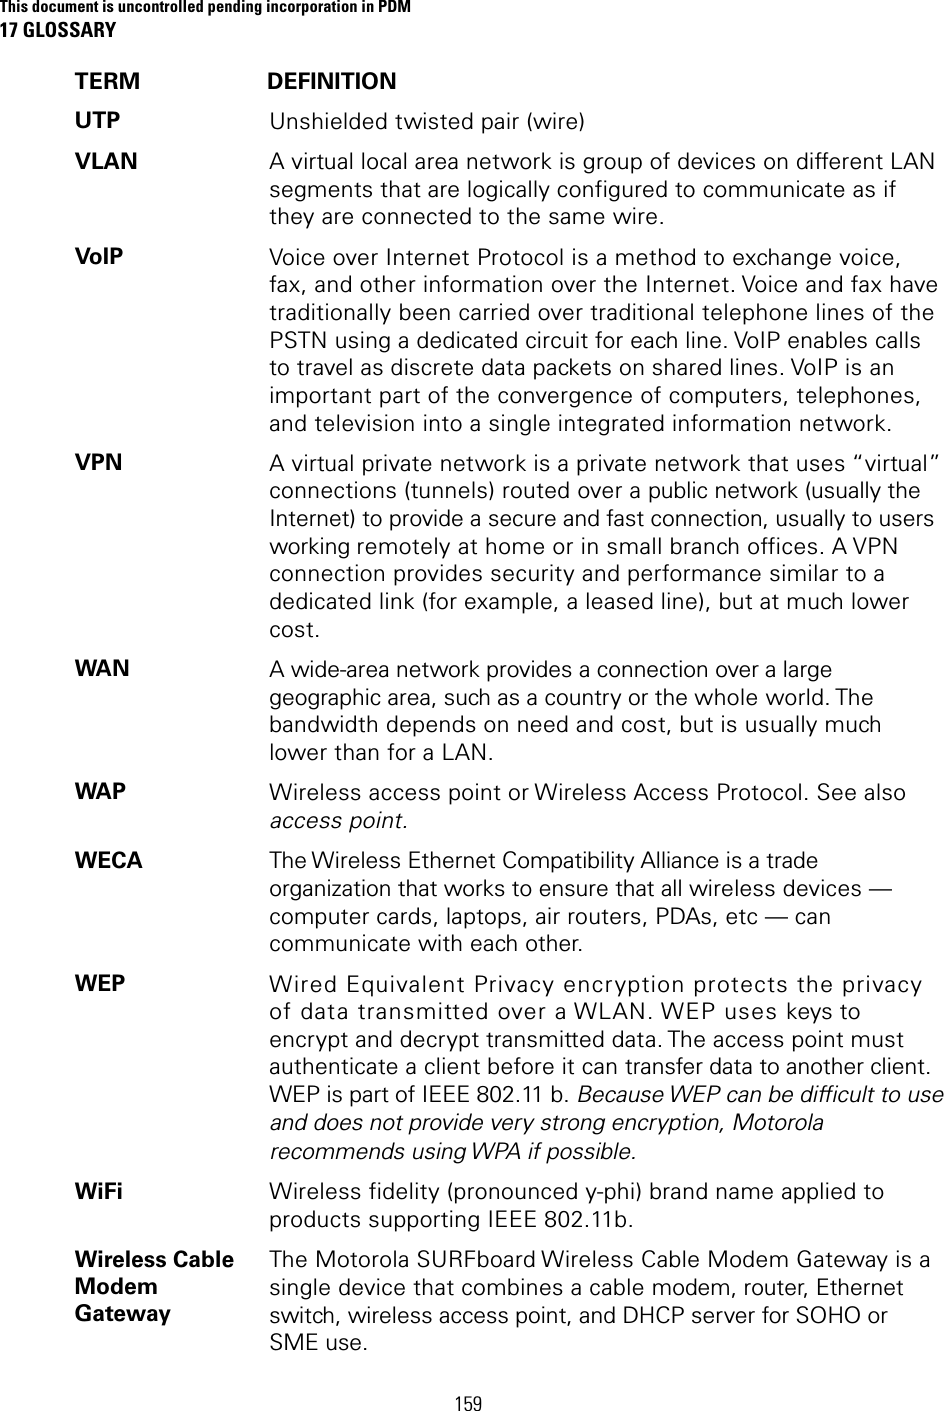 This document is uncontrolled pending incorporation in PDM 17 GLOSSARY  159 TERM DEFINITION UTP  Unshielded twisted pair (wire) VLAN  A virtual local area network is group of devices on different LAN segments that are logically configured to communicate as if they are connected to the same wire. VoIP  Voice over Internet Protocol is a method to exchange voice, fax, and other information over the Internet. Voice and fax have traditionally been carried over traditional telephone lines of the PSTN using a dedicated circuit for each line. VoIP enables calls to travel as discrete data packets on shared lines. VoIP is an important part of the convergence of computers, telephones, and television into a single integrated information network. VPN  A virtual private network is a private network that uses “virtual” connections (tunnels) routed over a public network (usually the Internet) to provide a secure and fast connection, usually to users working remotely at home or in small branch offices. A VPN connection provides security and performance similar to a dedicated link (for example, a leased line), but at much lower cost. WAN  A wide-area network provides a connection over a large geographic area, such as a country or the whole world. The bandwidth depends on need and cost, but is usually much lower than for a LAN. WAP  Wireless access point or Wireless Access Protocol. See also access point. WECA  The Wireless Ethernet Compatibility Alliance is a trade organization that works to ensure that all wireless devices — computer cards, laptops, air routers, PDAs, etc — can communicate with each other. WEP  Wired Equivalent Privacy encryption protects the privacy of data transmitted over a WLAN. WEP uses keys to encrypt and decrypt transmitted data. The access point must authenticate a client before it can transfer data to another client. WEP is part of IEEE 802.11 b. Because WEP can be difficult to use and does not provide very strong encryption, Motorola recommends using WPA if possible. WiFi  Wireless fidelity (pronounced y-phi) brand name applied to products supporting IEEE 802.11b. Wireless Cable Modem Gateway The Motorola SURFboard Wireless Cable Modem Gateway is a single device that combines a cable modem, router, Ethernet switch, wireless access point, and DHCP server for SOHO or SME use. 